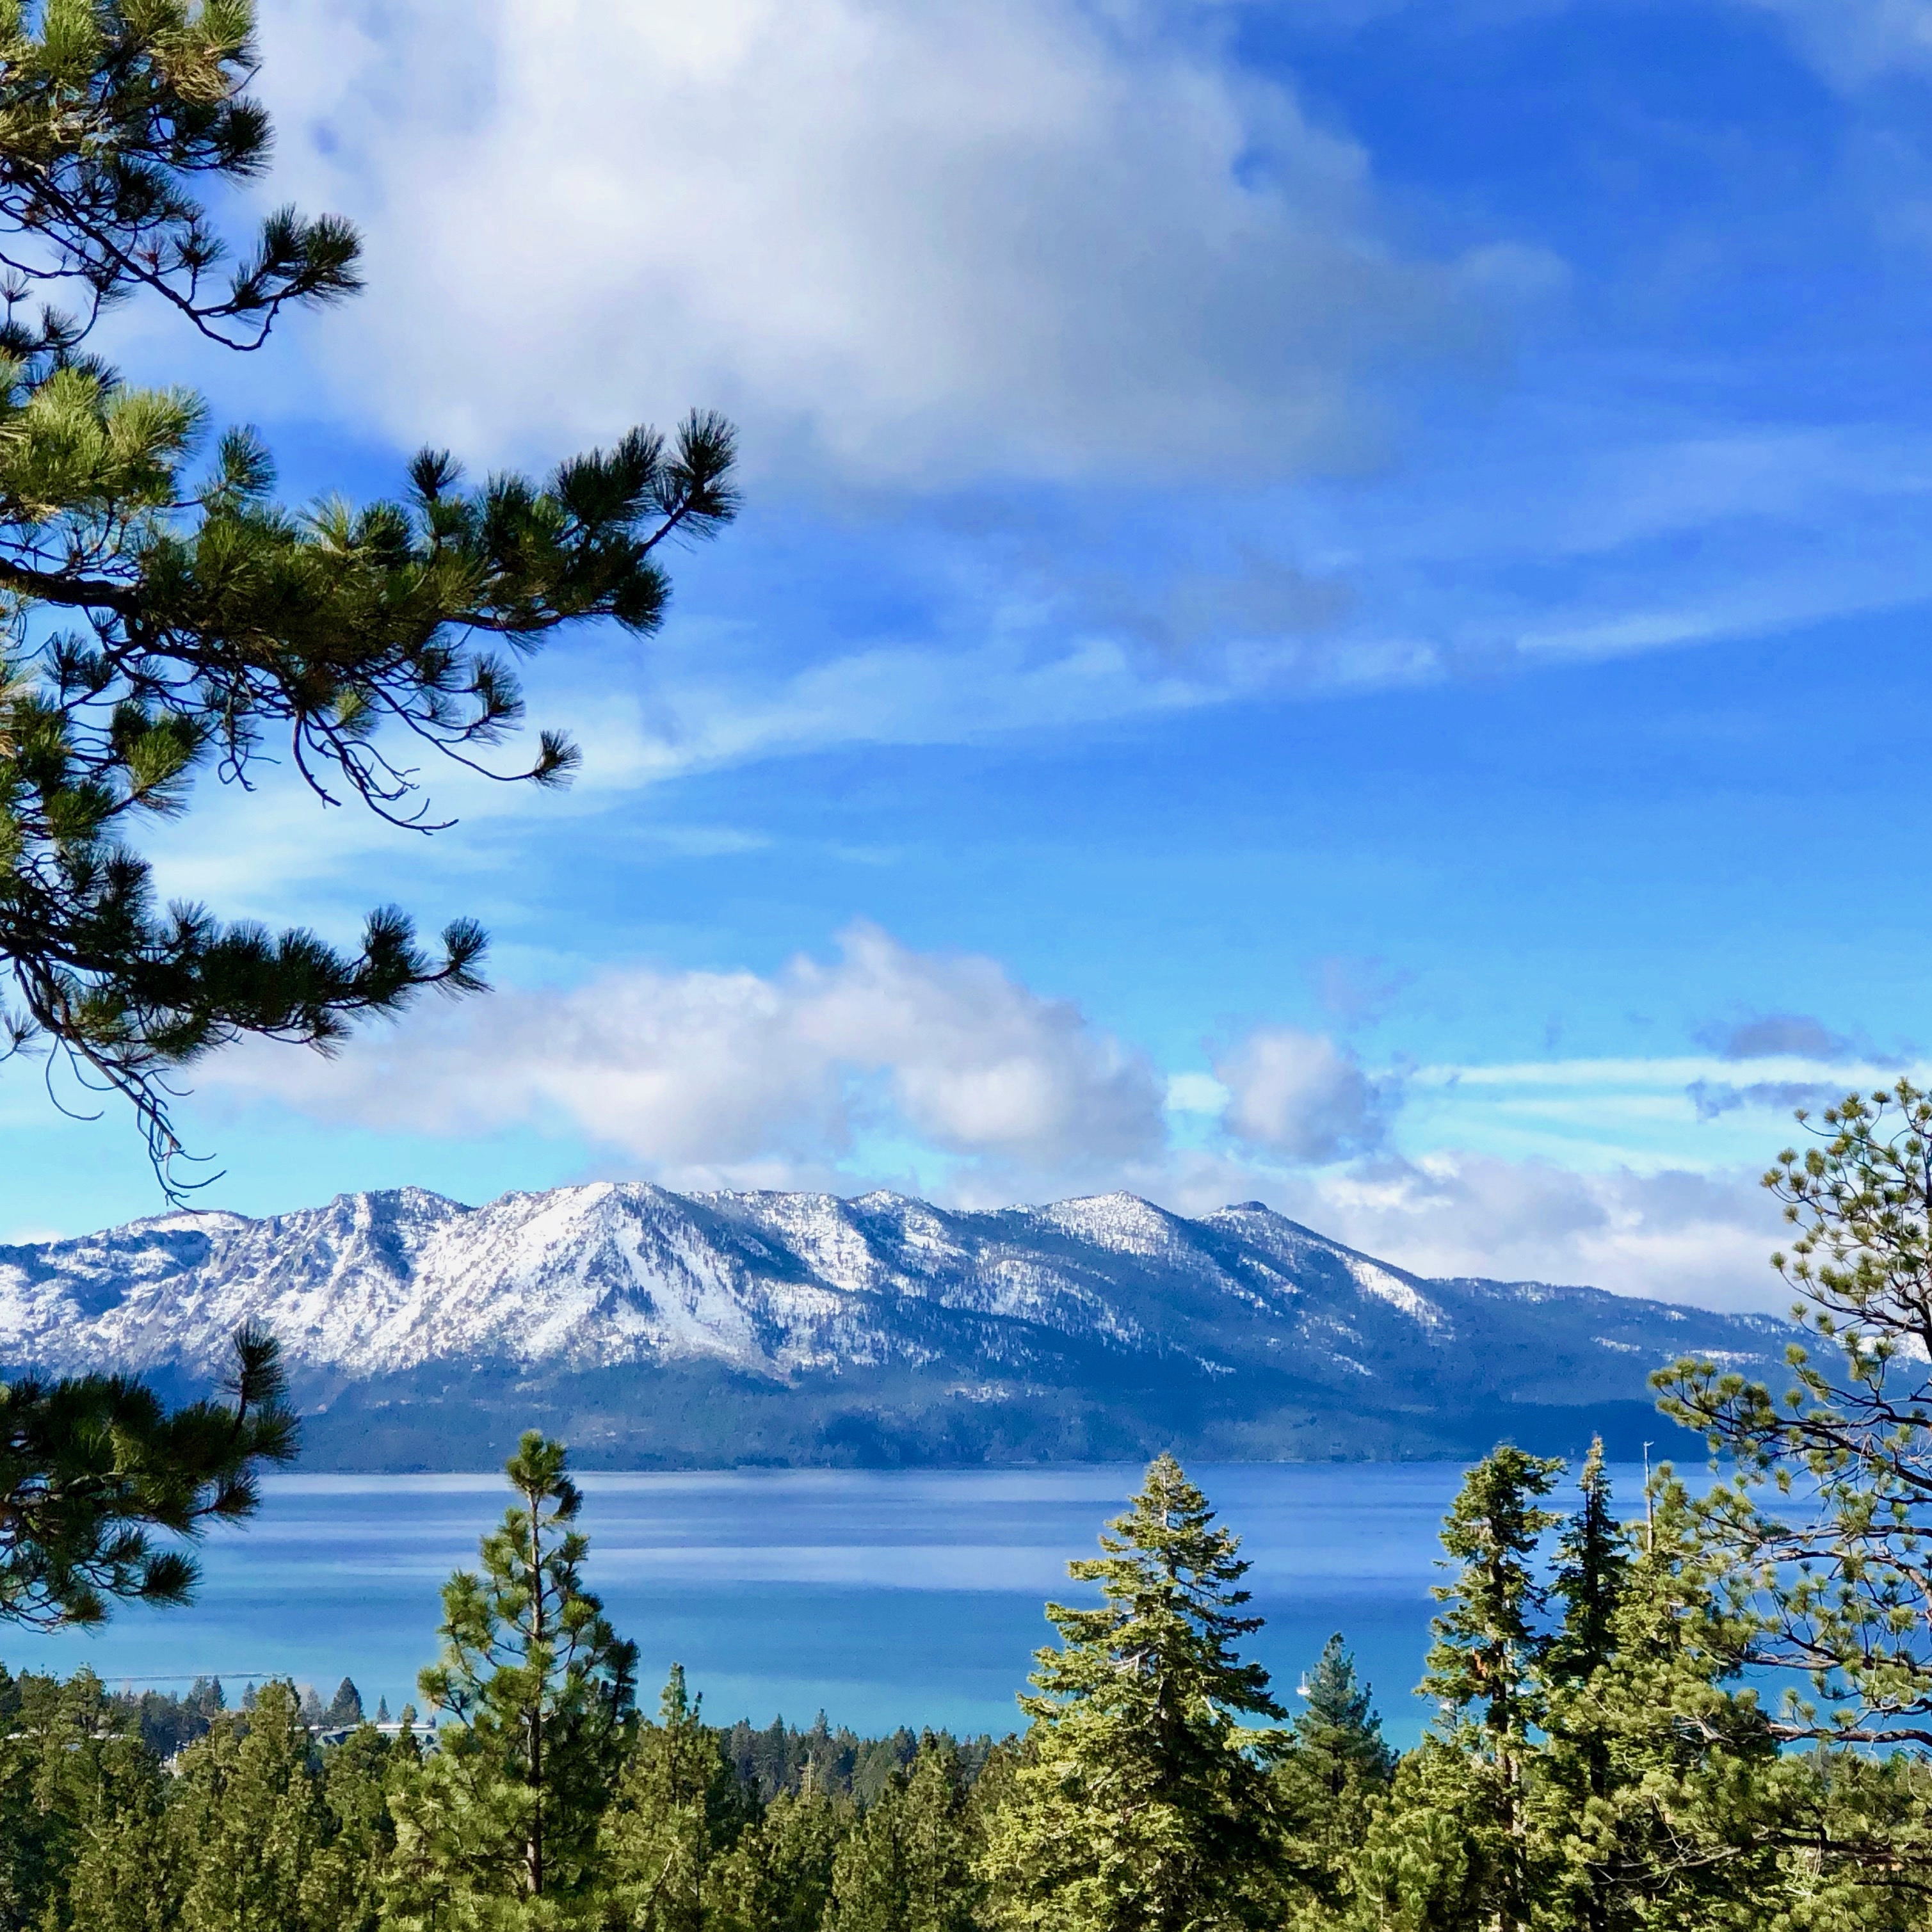 What to do in South Lake Tahoe Vagamom